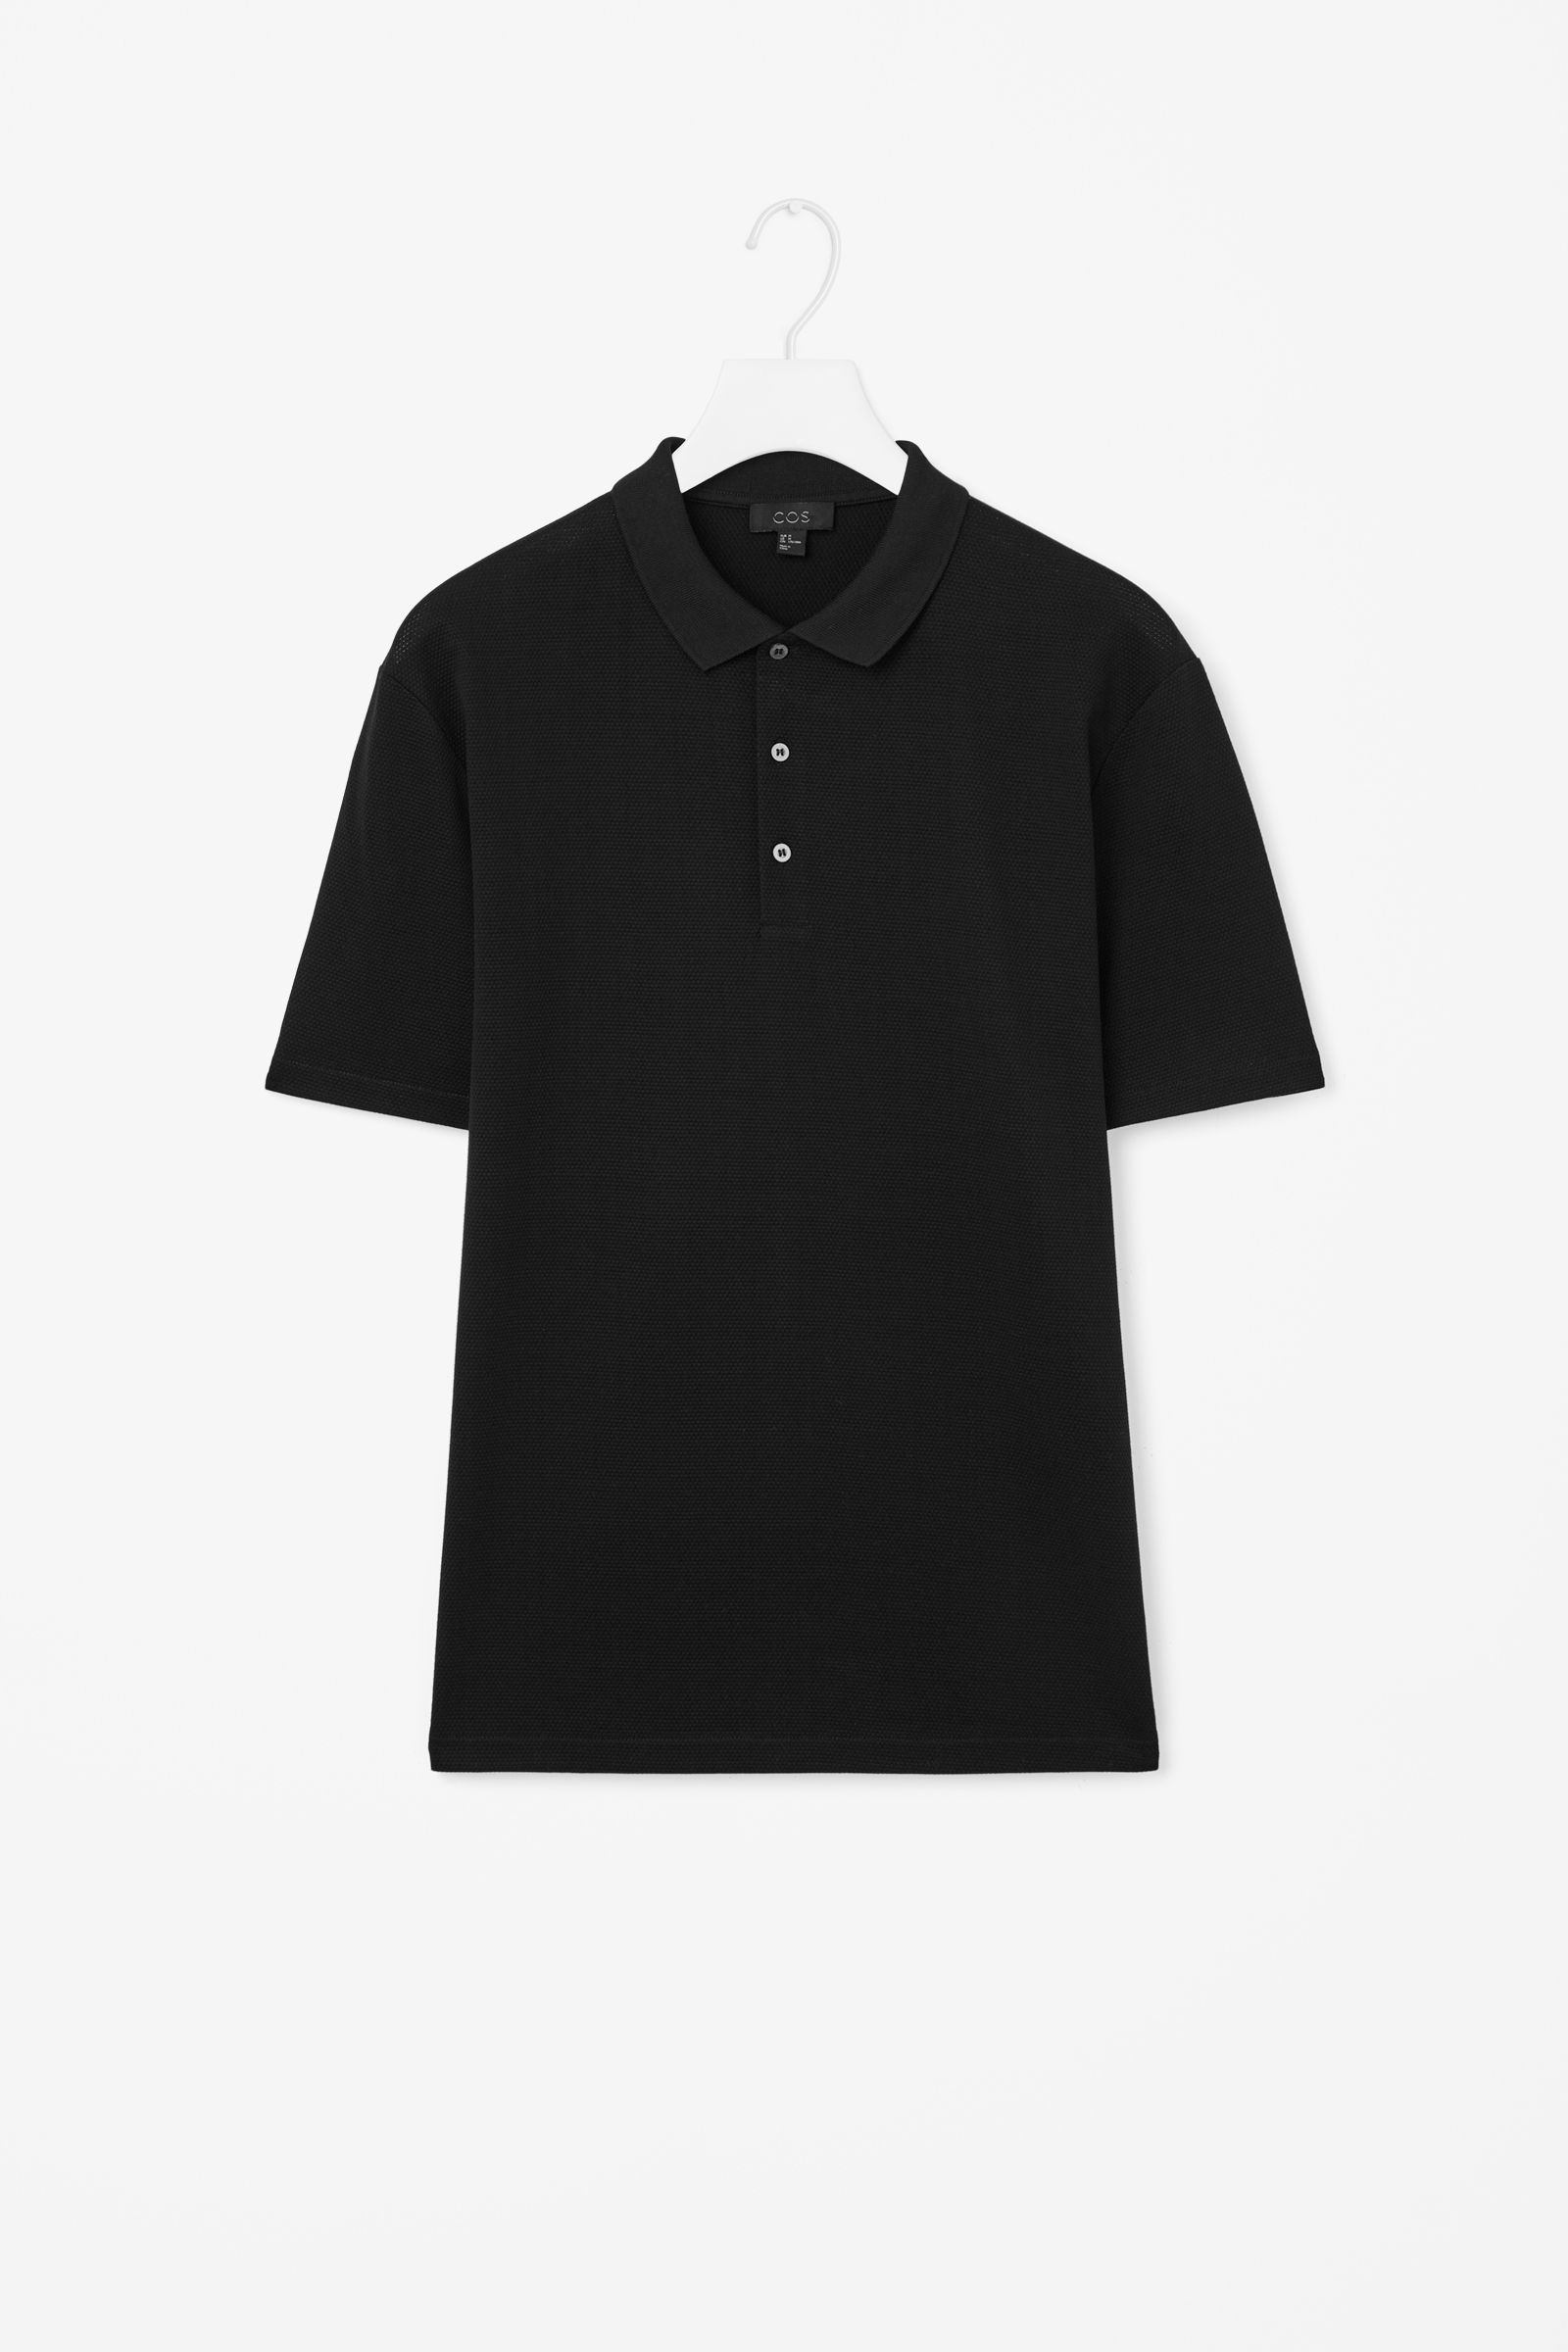 Cos Textured Polo Shirt in Black for Men | Lyst